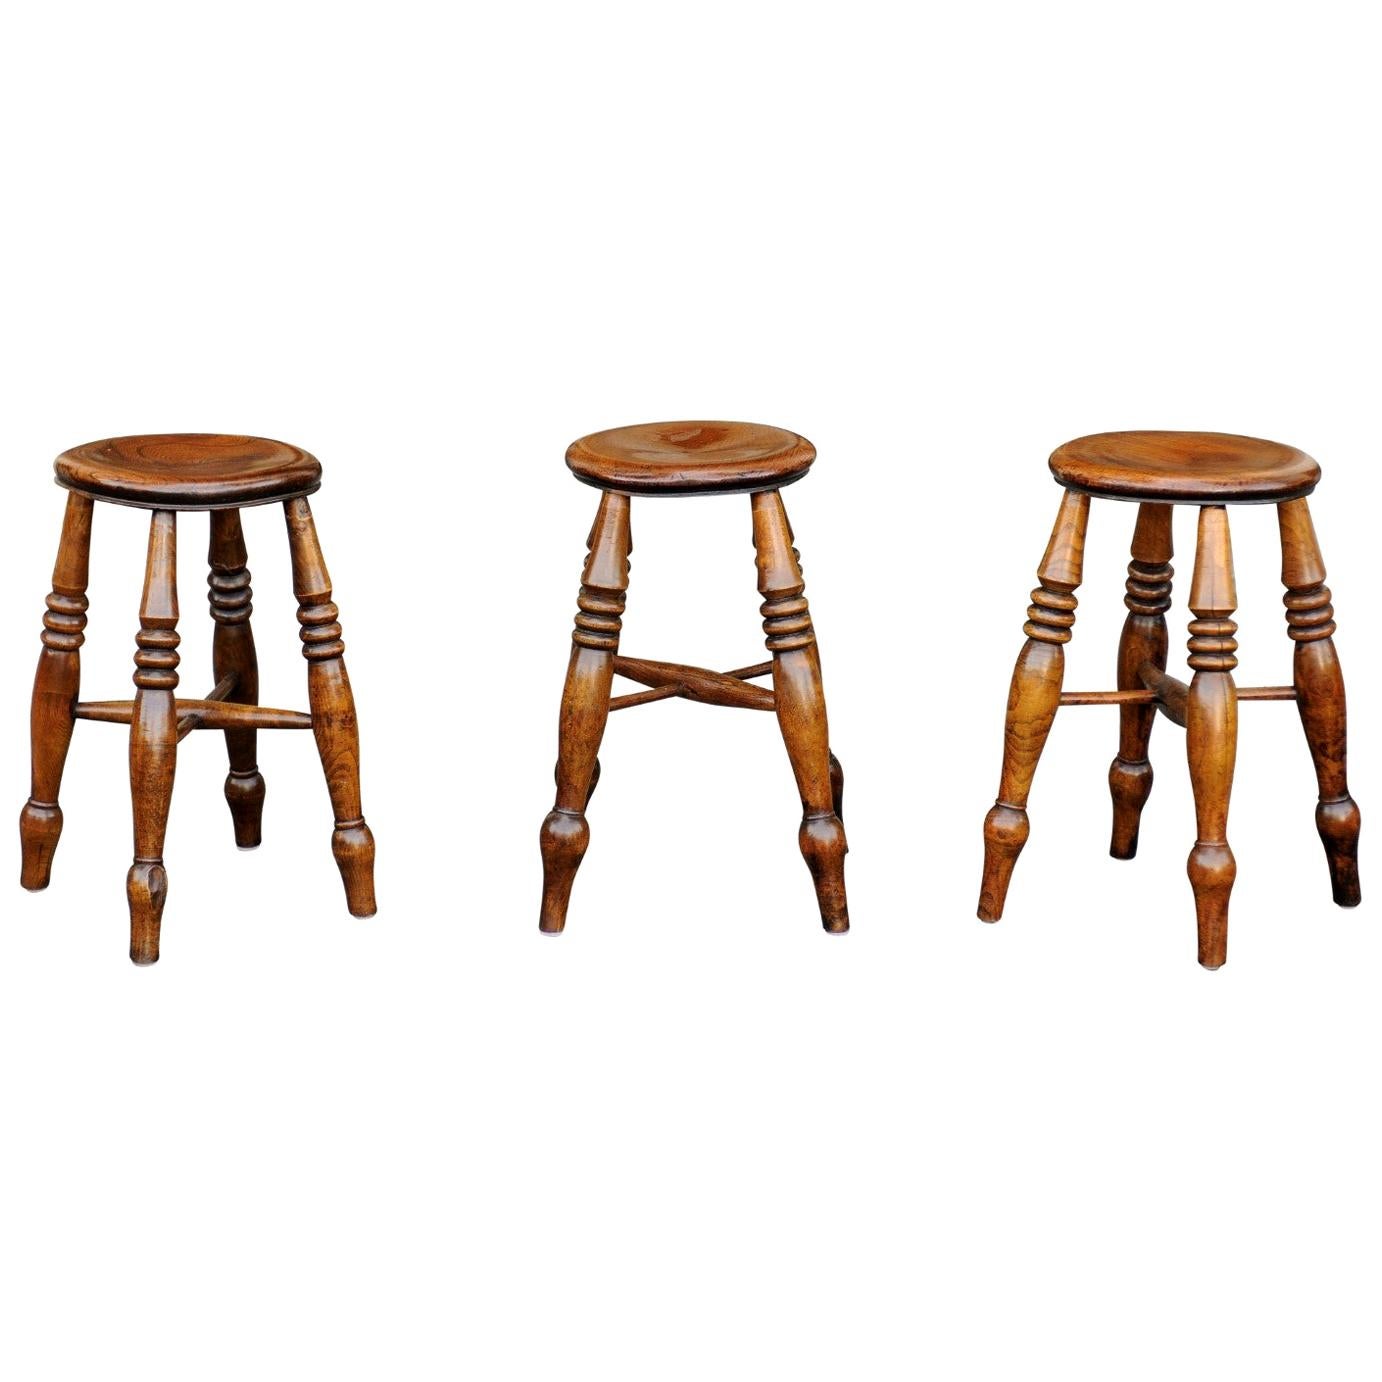 English 1880s Elm Stools with Turned Legs and Spindle-Shaped Cross Stretchers